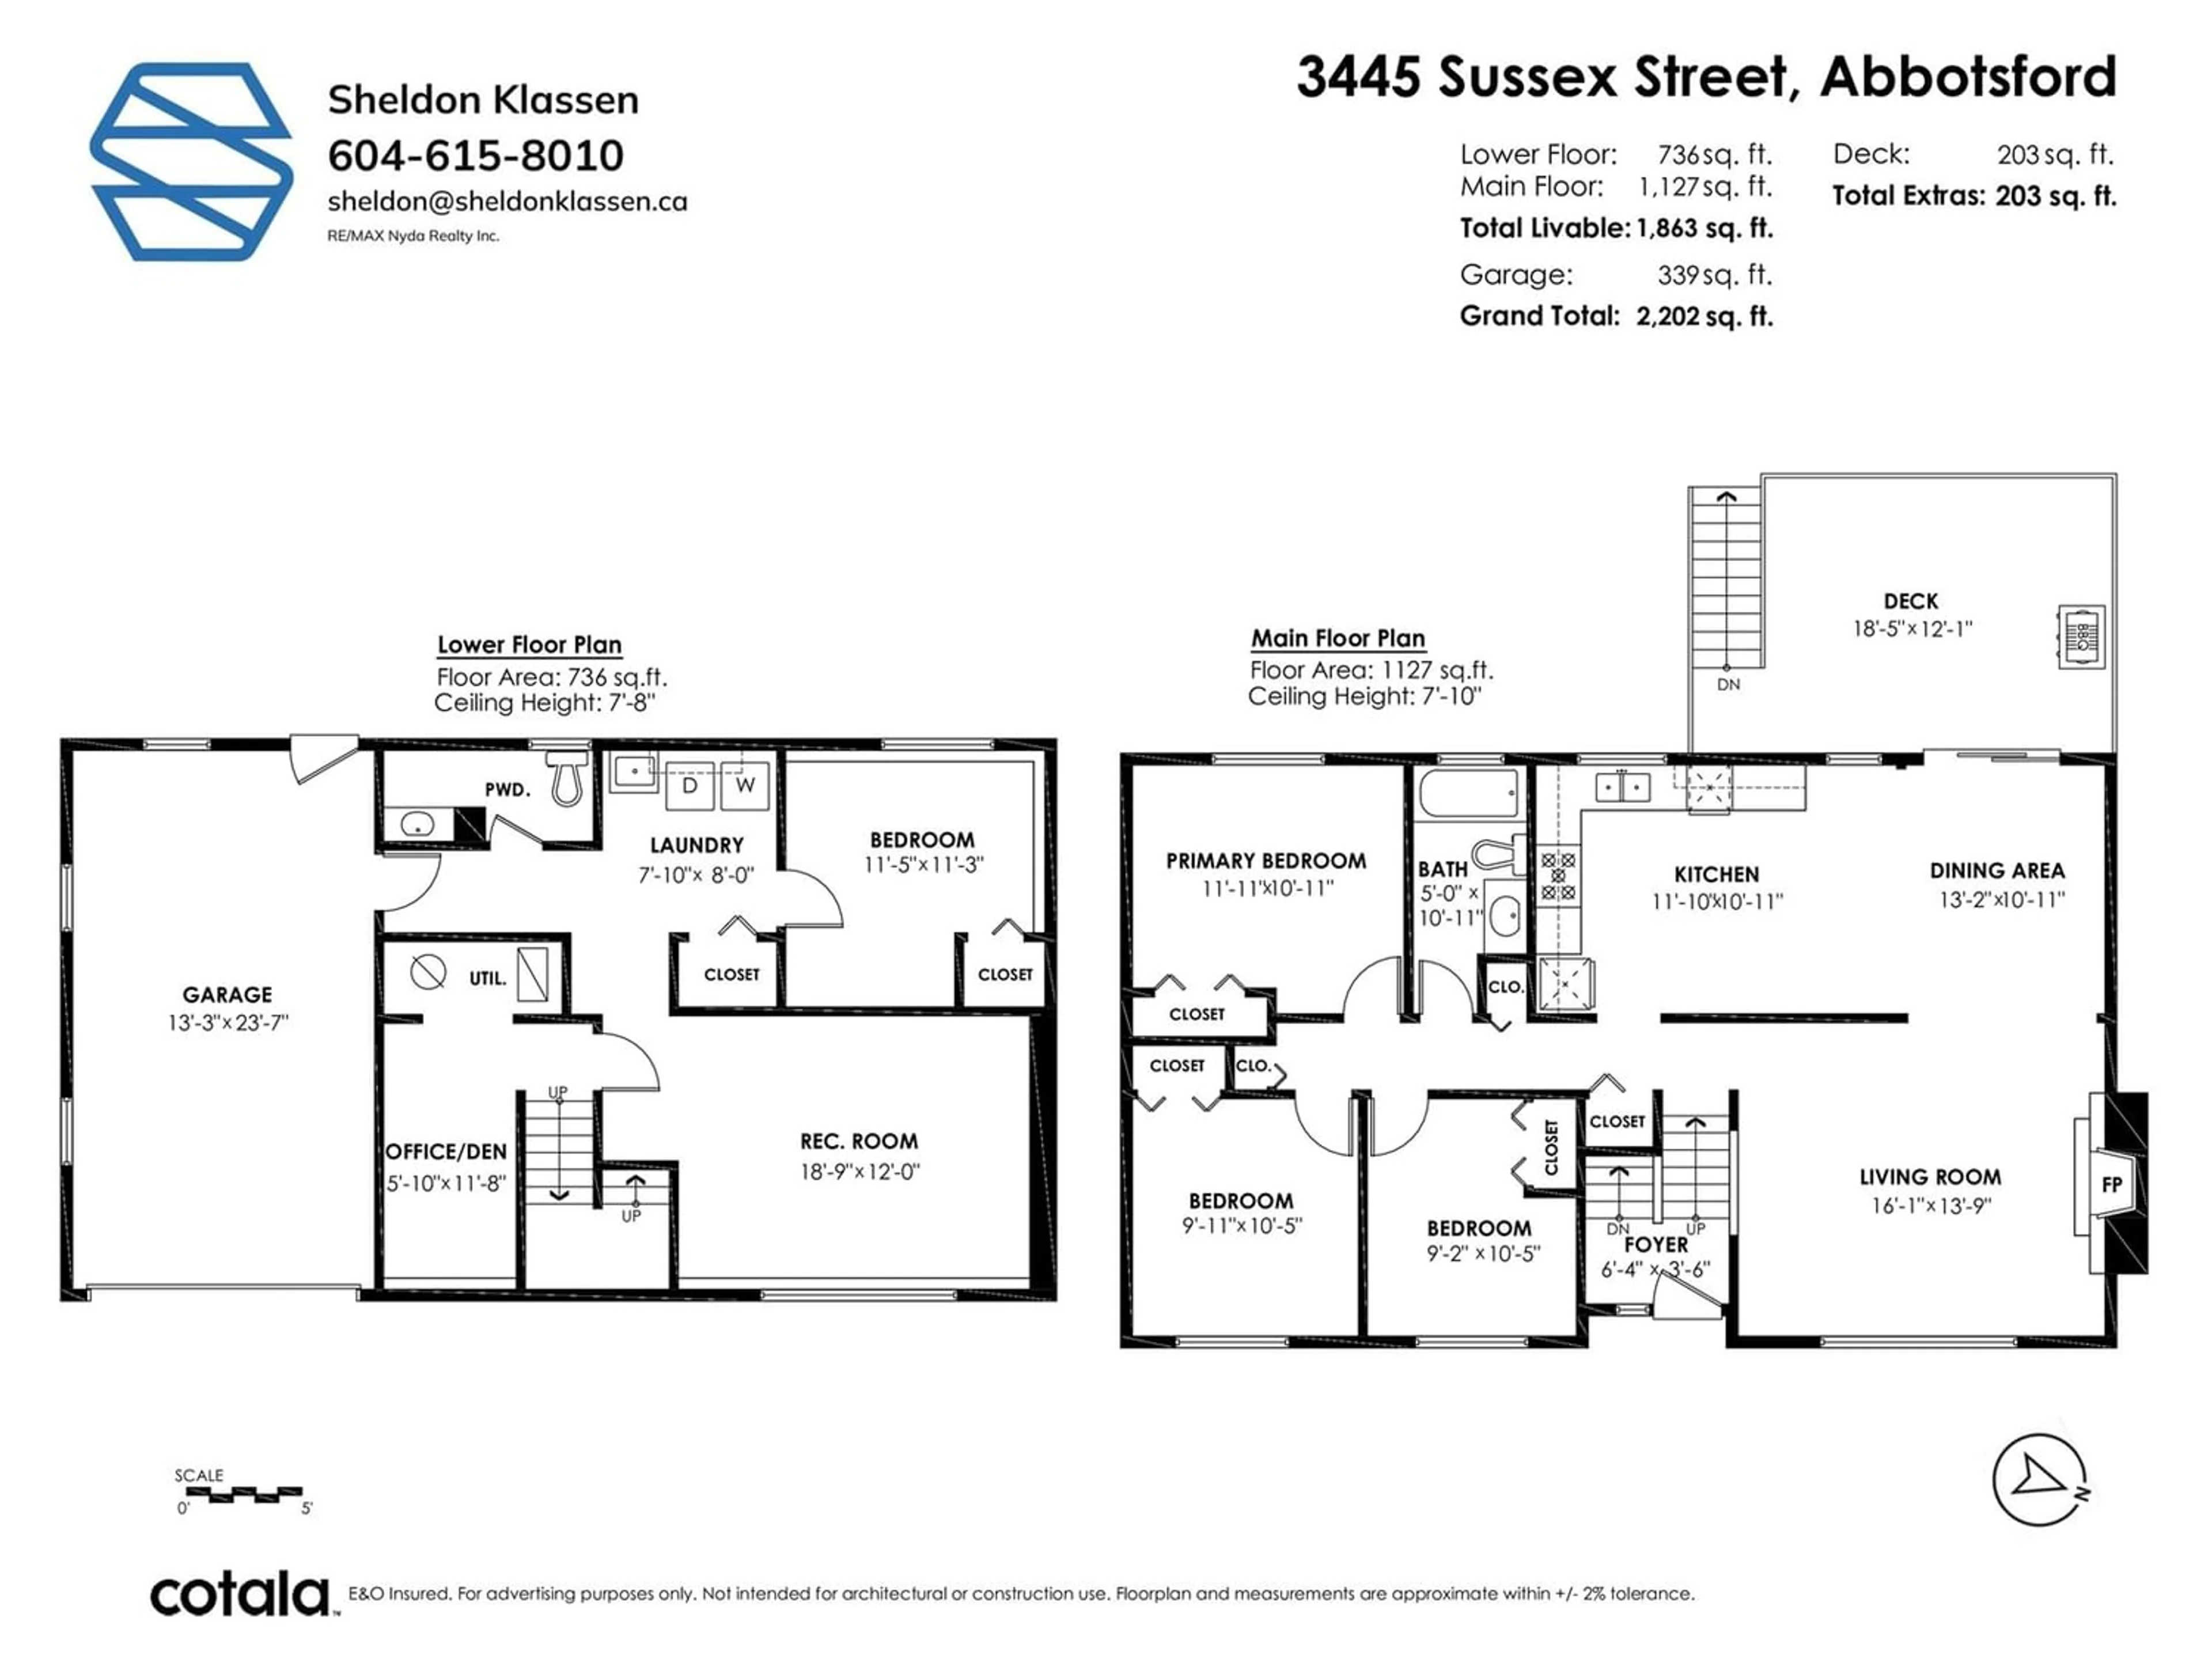 Floor plan for 3445 SUSSEX STREET, Abbotsford British Columbia V2S5A7